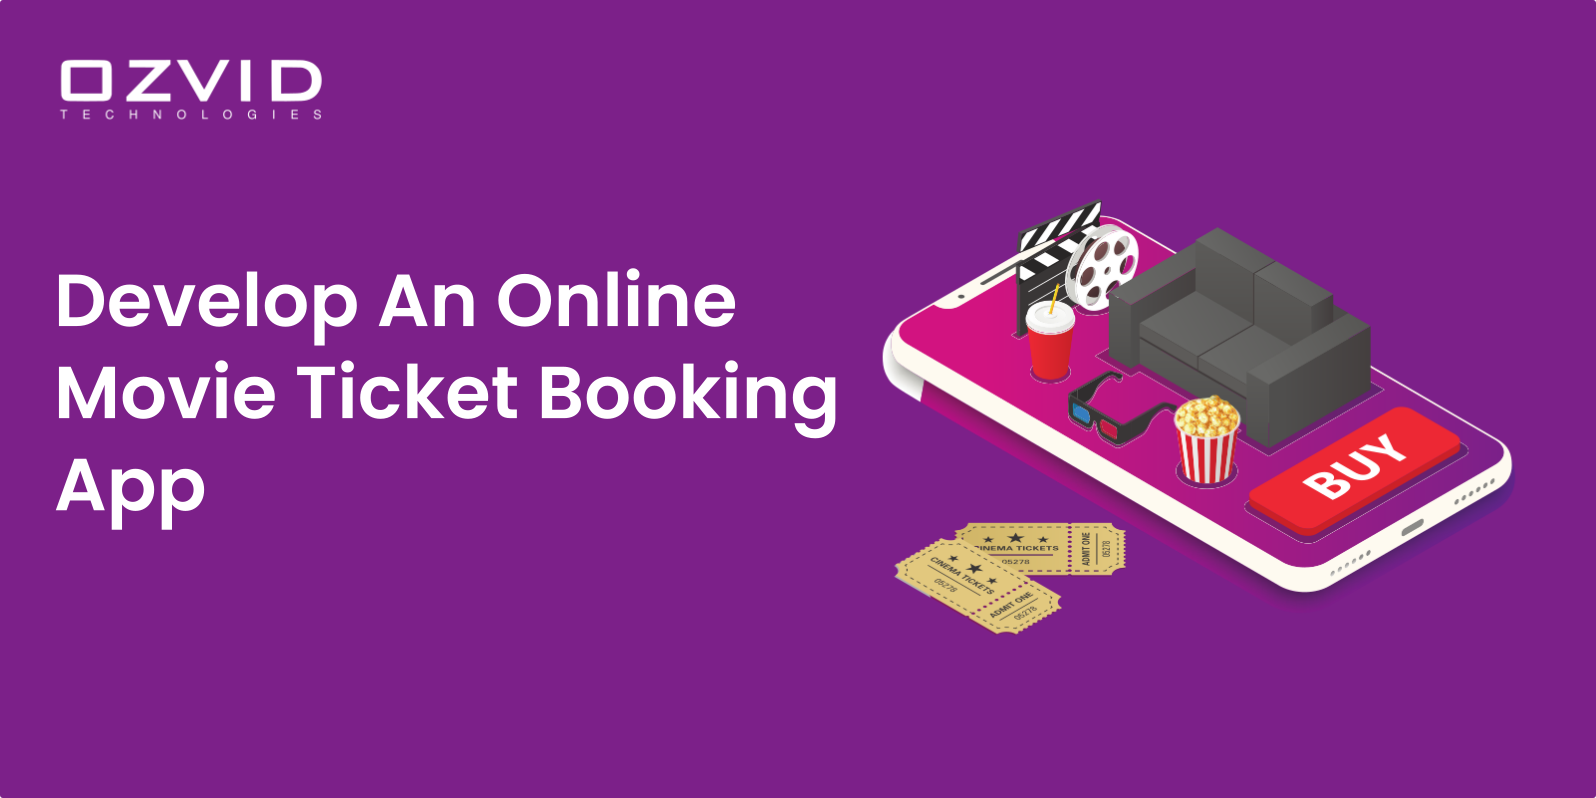 Must-Have Features For Developing A Movie Ticket Booking Platform in 2022